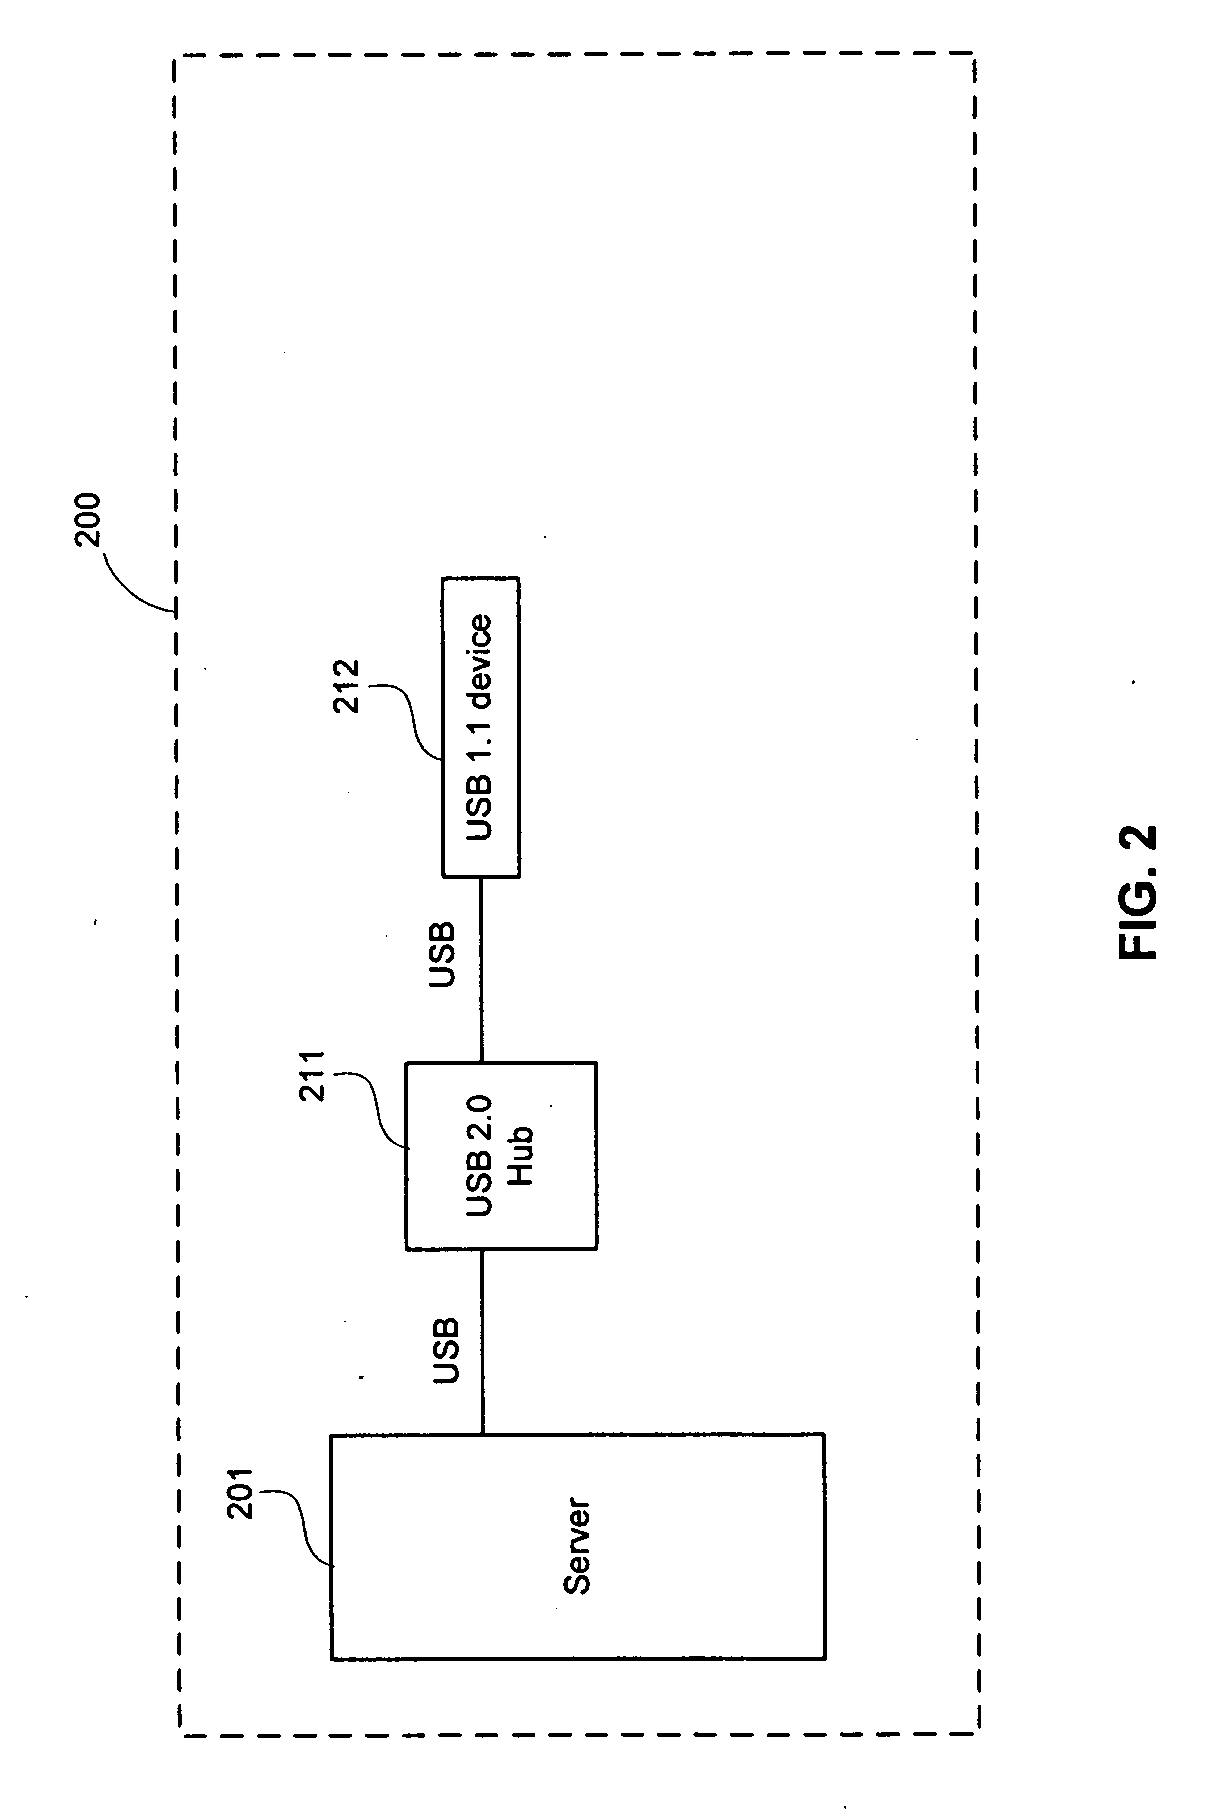 Method and system for hardware based implementation of USB 1.1 over a high speed link